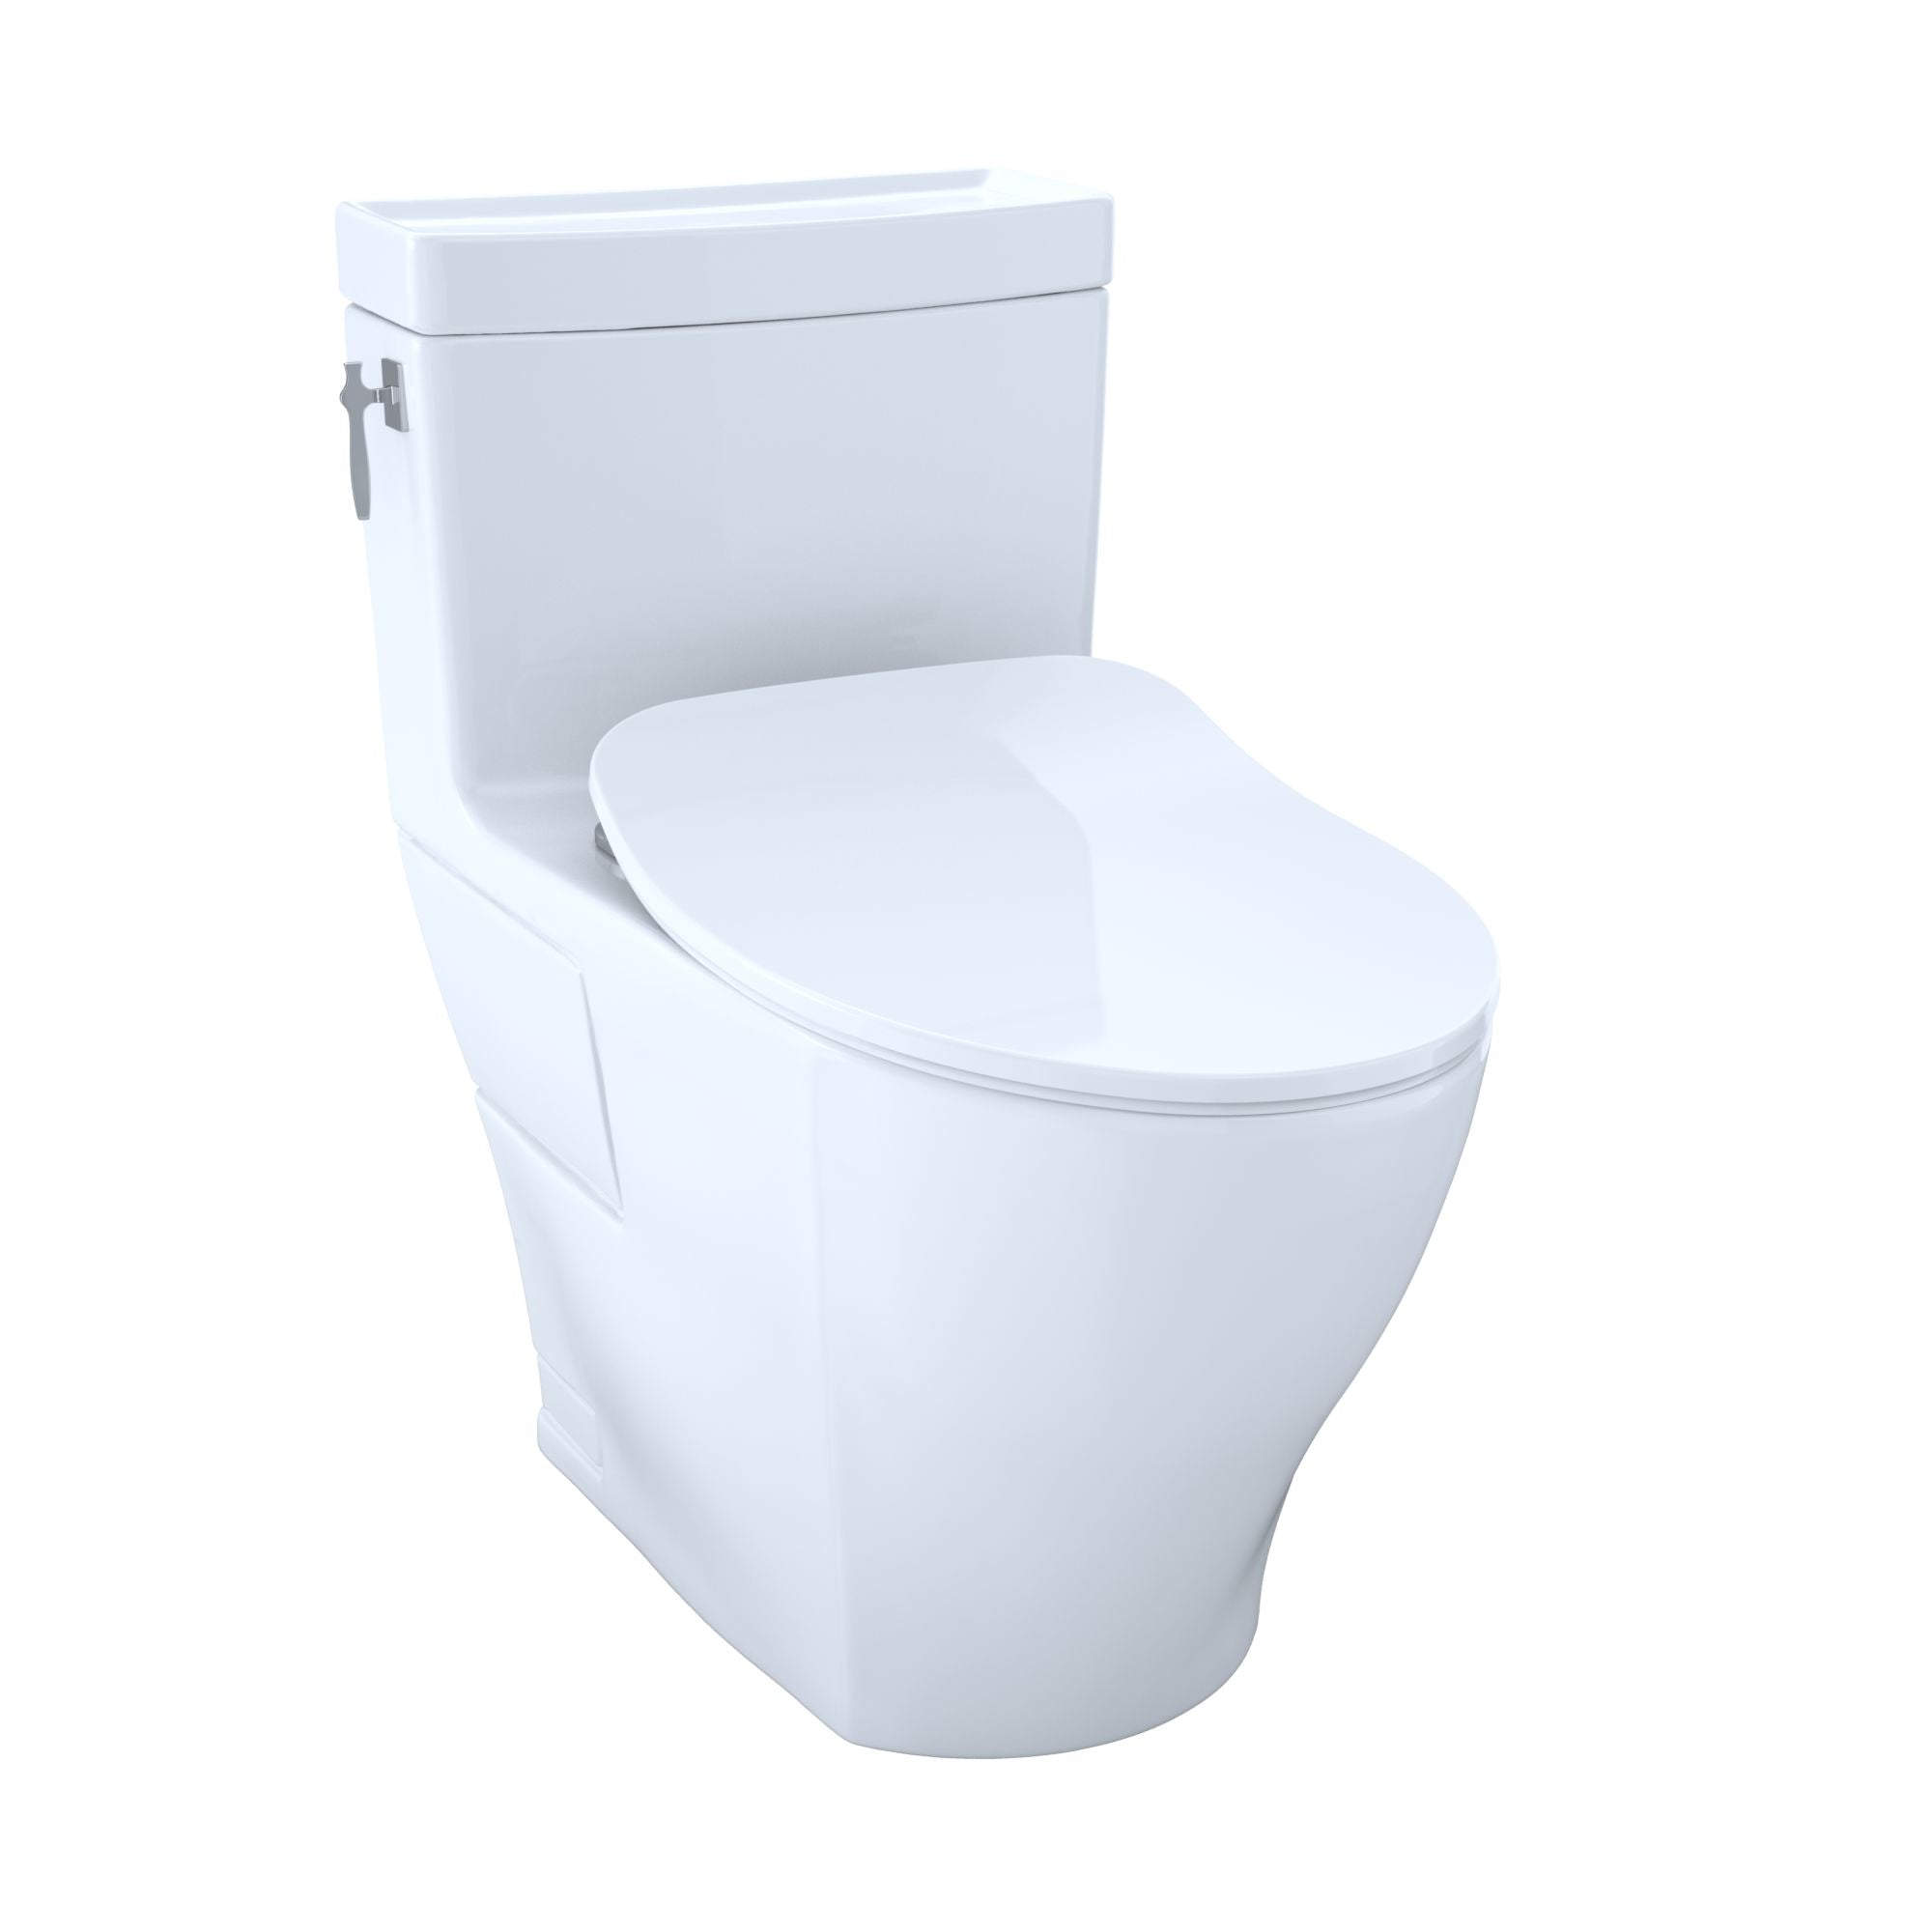 Toto Aimes One-piece High-efficiency Toilet 1.28 GPF